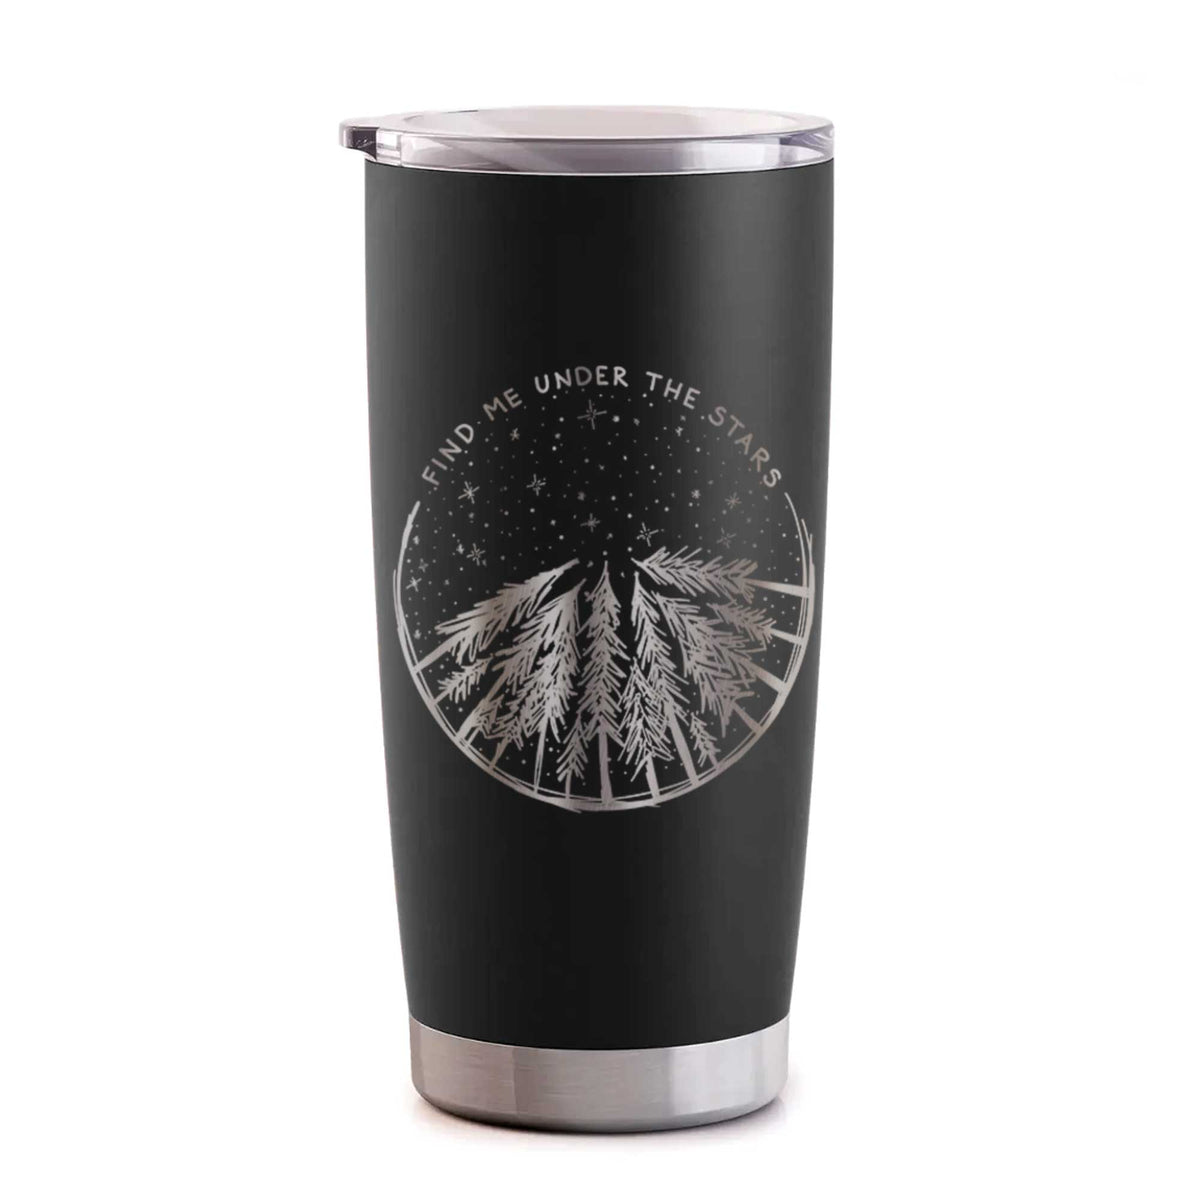 Find Me Under the Stars - 20oz Polar Insulated Tumbler